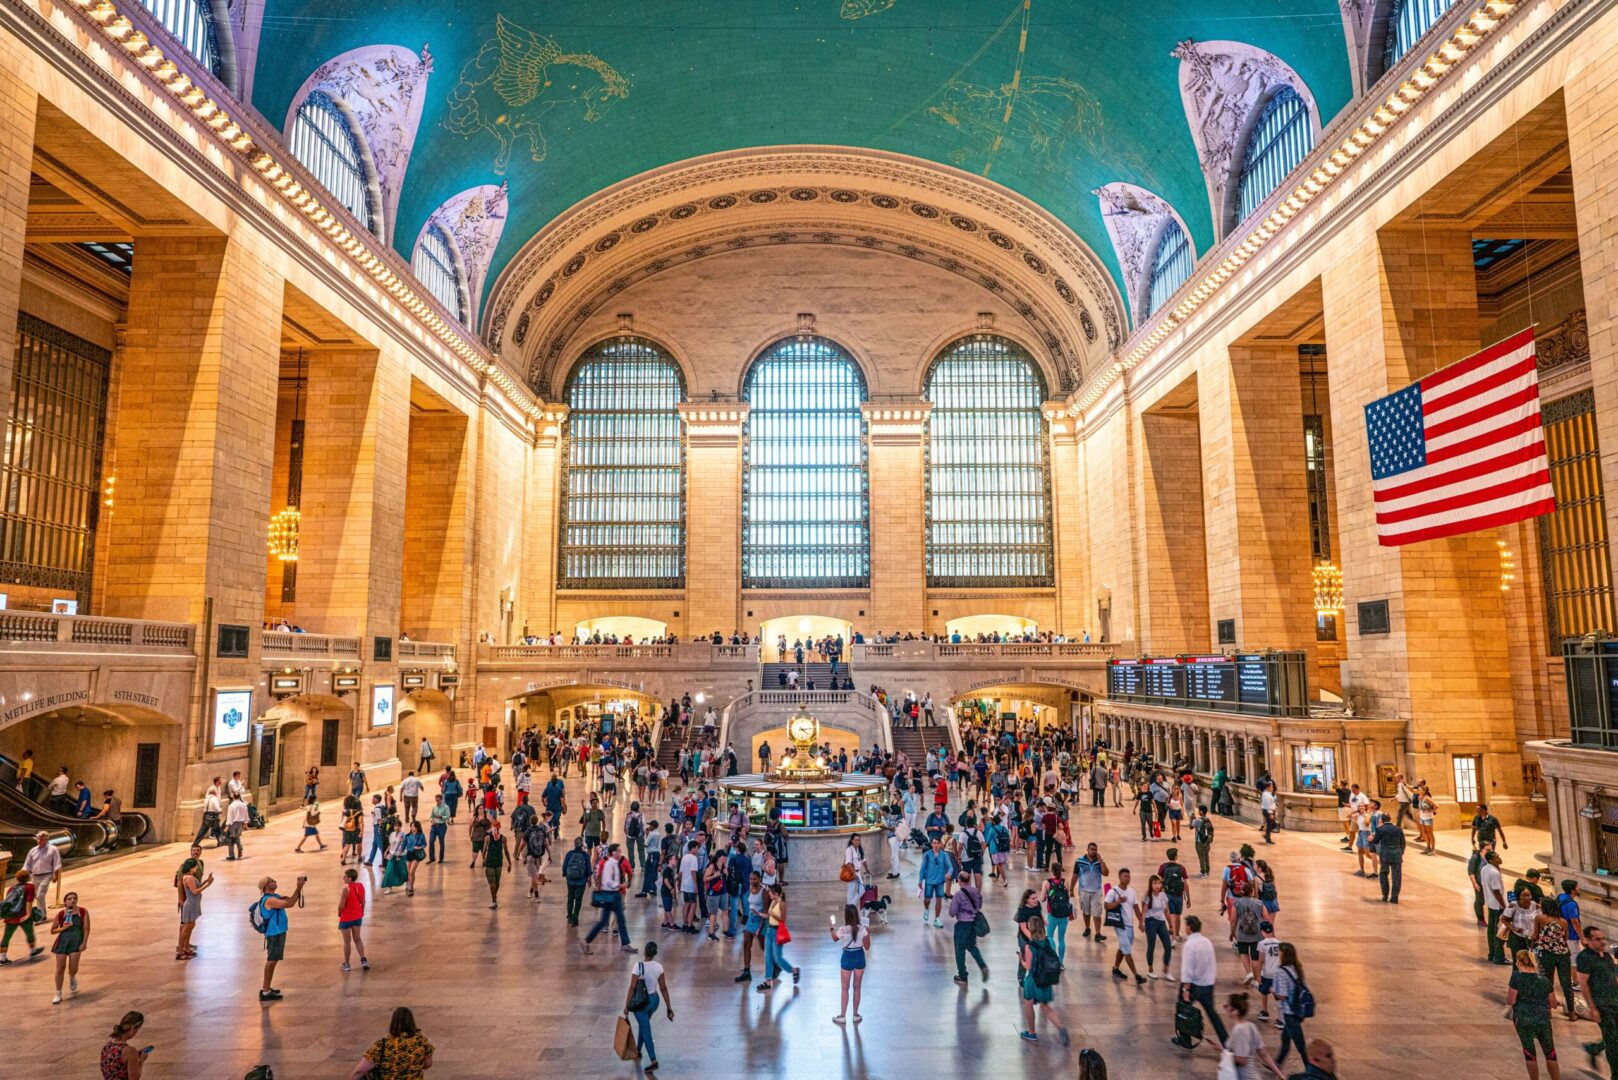 Grand central terminal bustling with activity beneath an american flag and the ornate celestial ceiling.